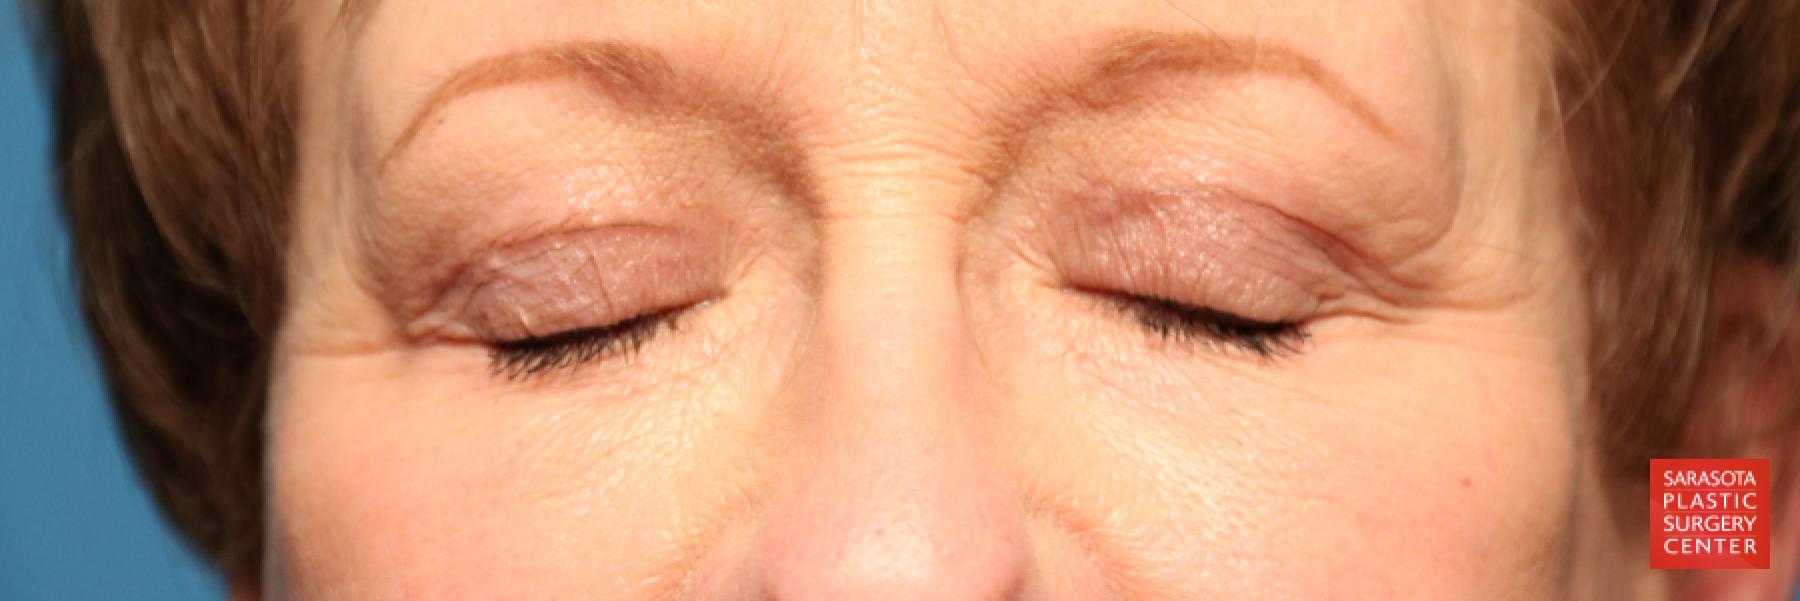 Eyelid Lift: Patient 20 - After 3